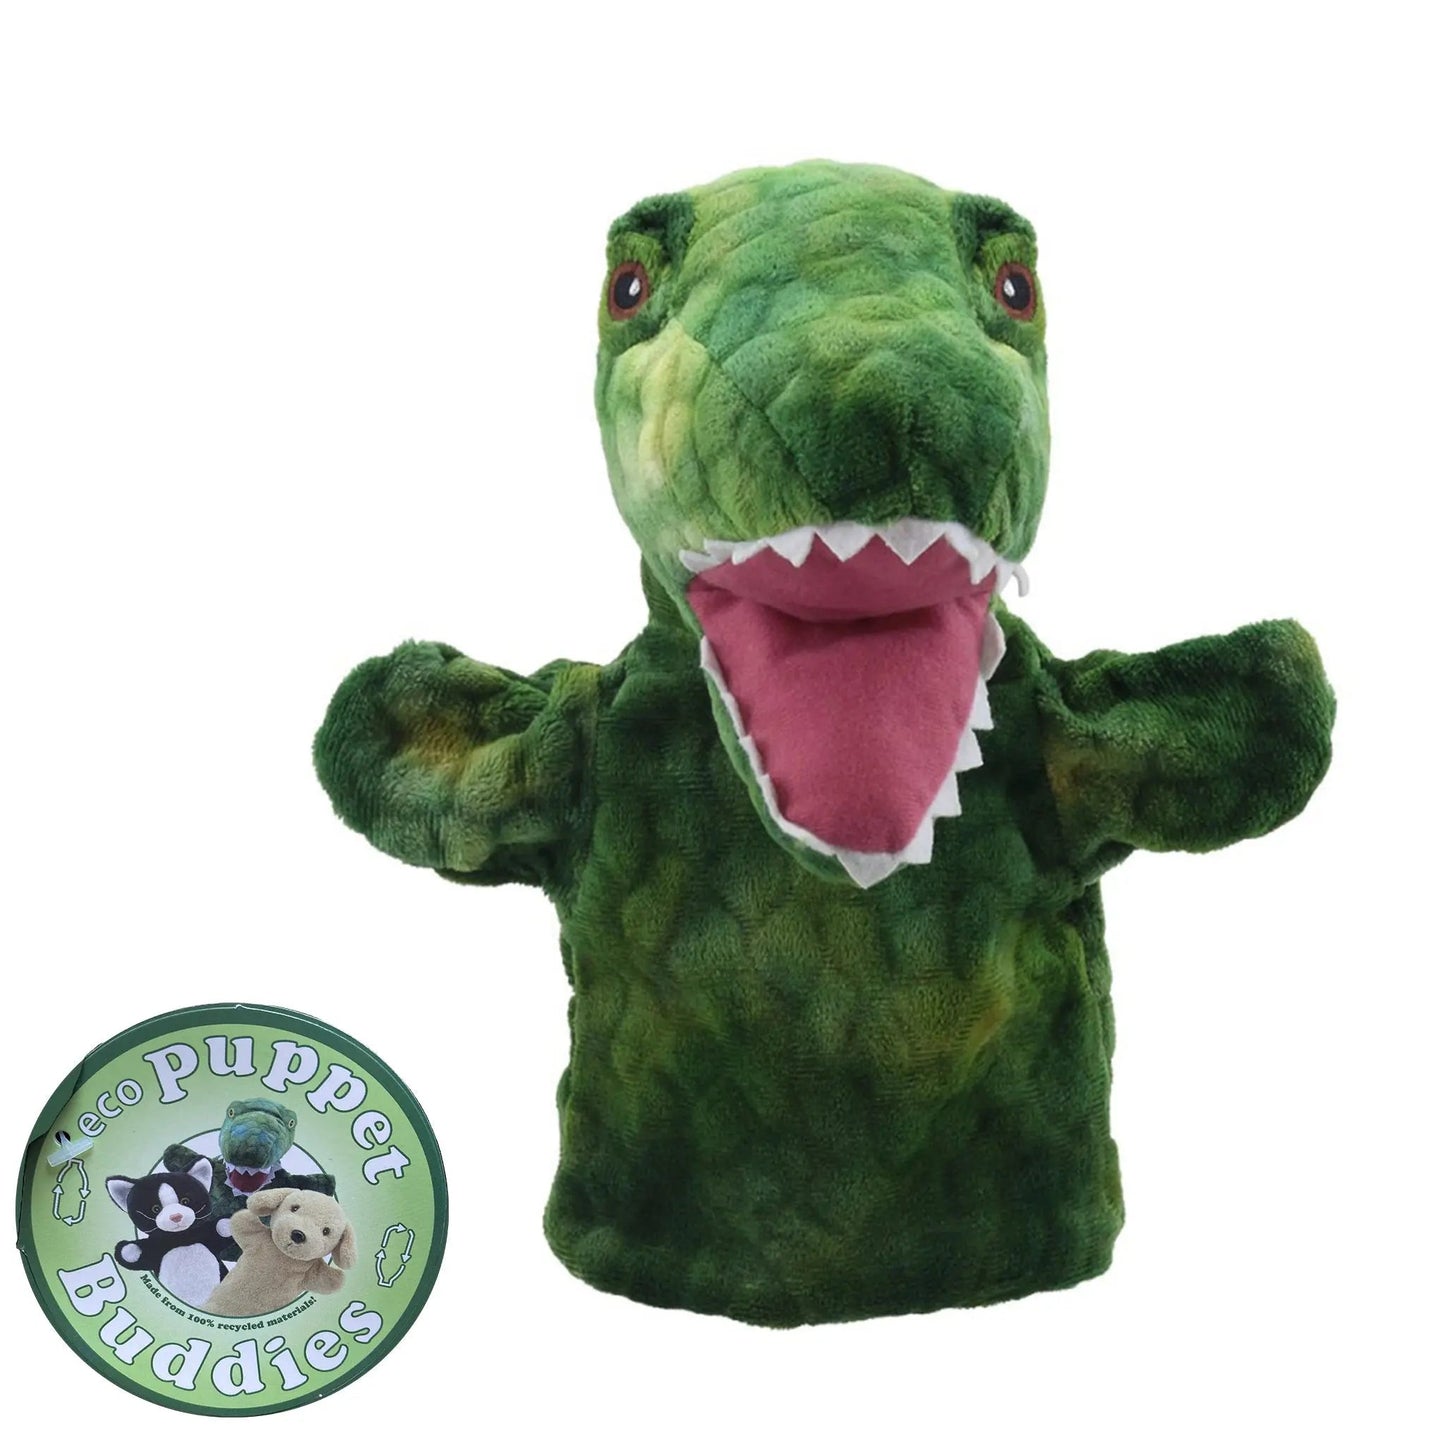 T-Rex Eco Puppet Buddies Hand Puppet - The Puppet Company - The Forgotten Toy Shop